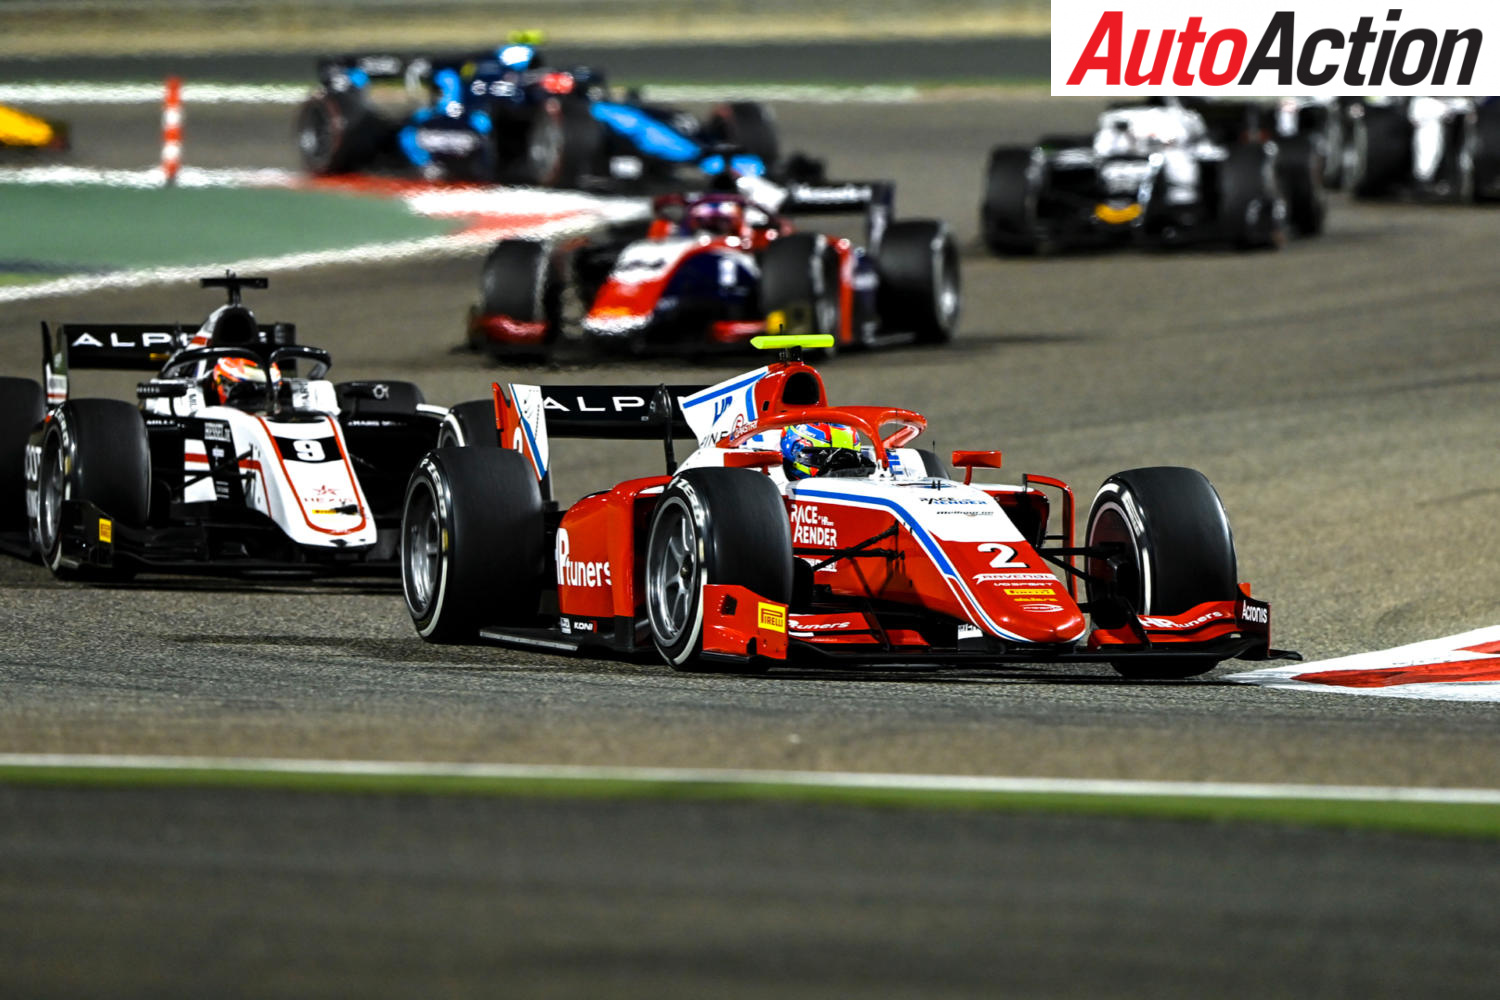 Oscar Piastri scores first F2 win - Image: Suttons